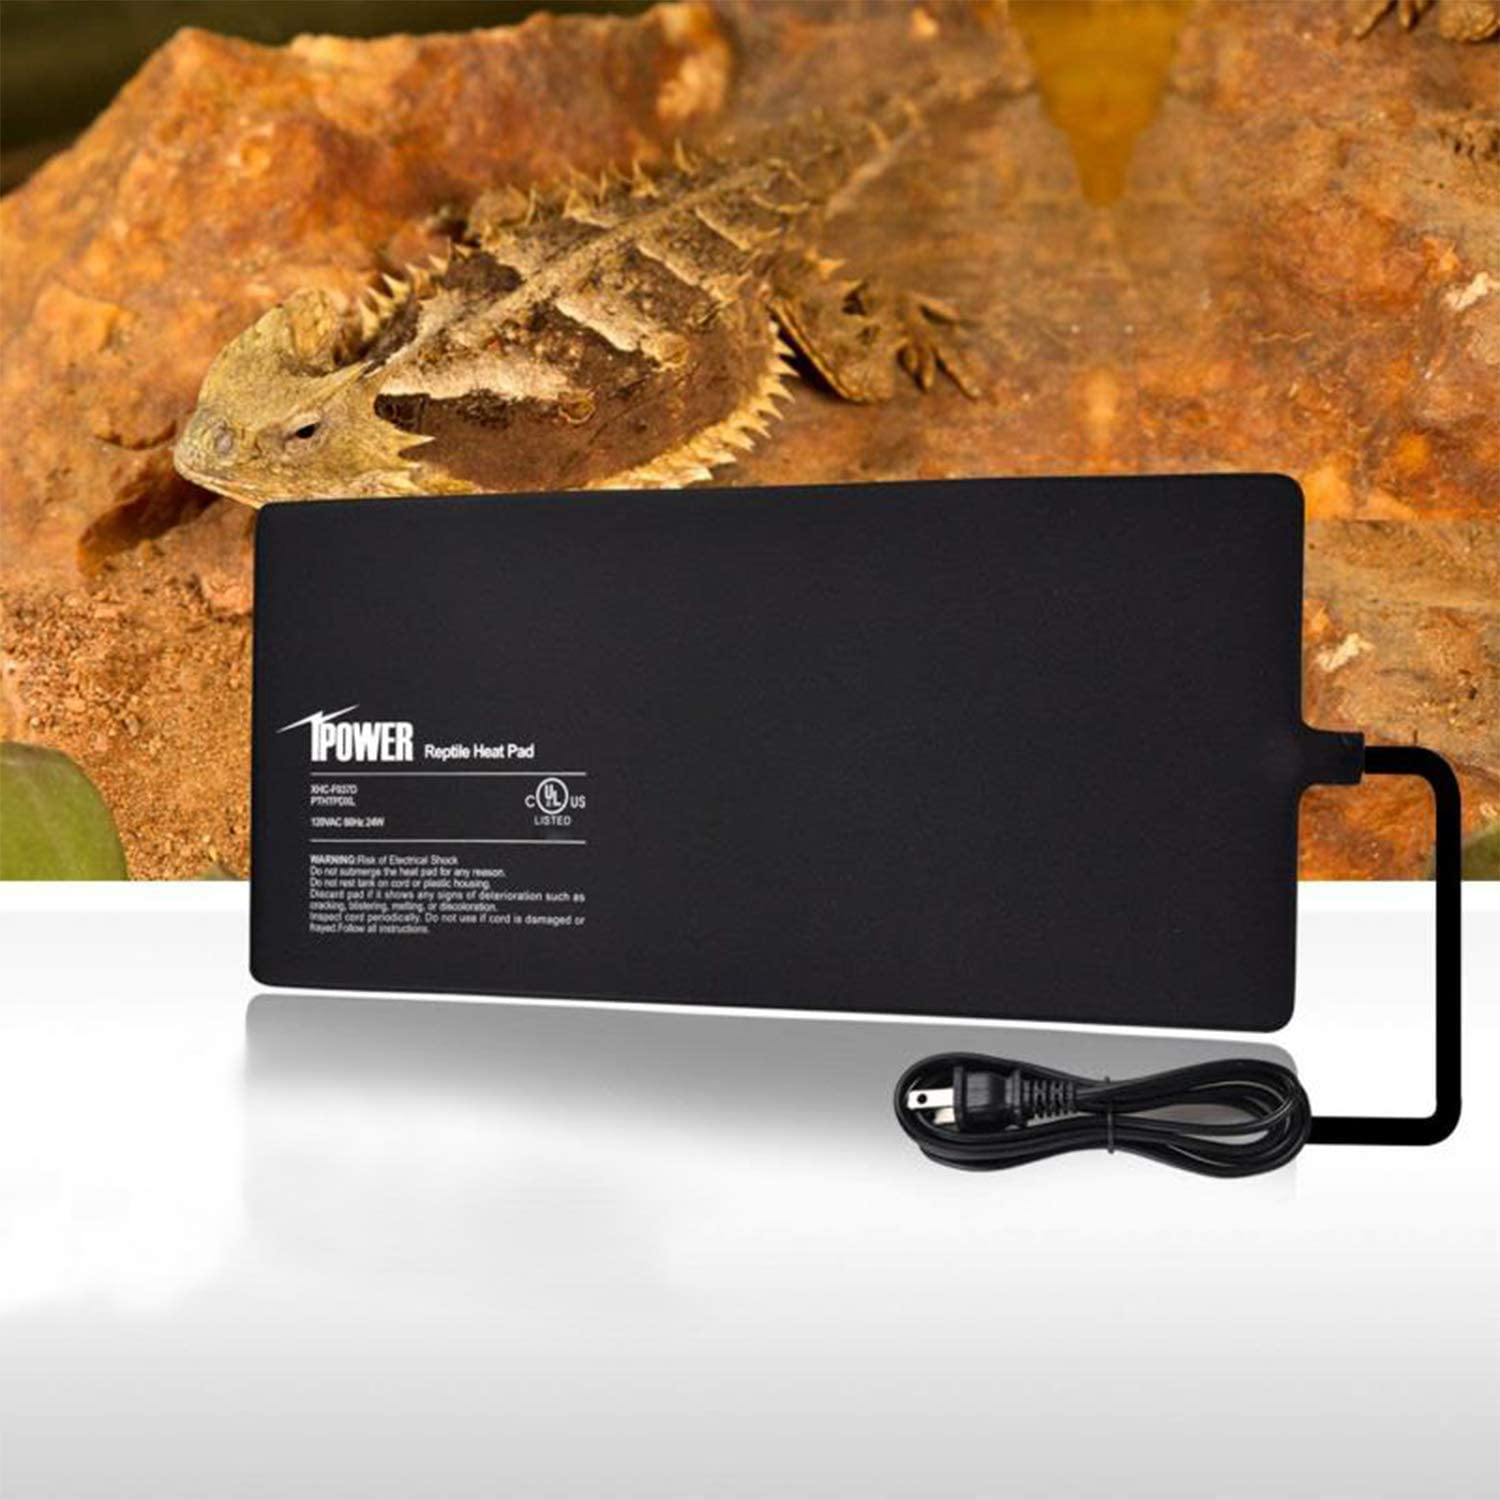 Ipower 8 by 12-Inch Reptile Heat Mat under Tank Heater Terrarium Heating Pad Ideal for Spider Snake Tarantula Hermit Crab Turtle, Black